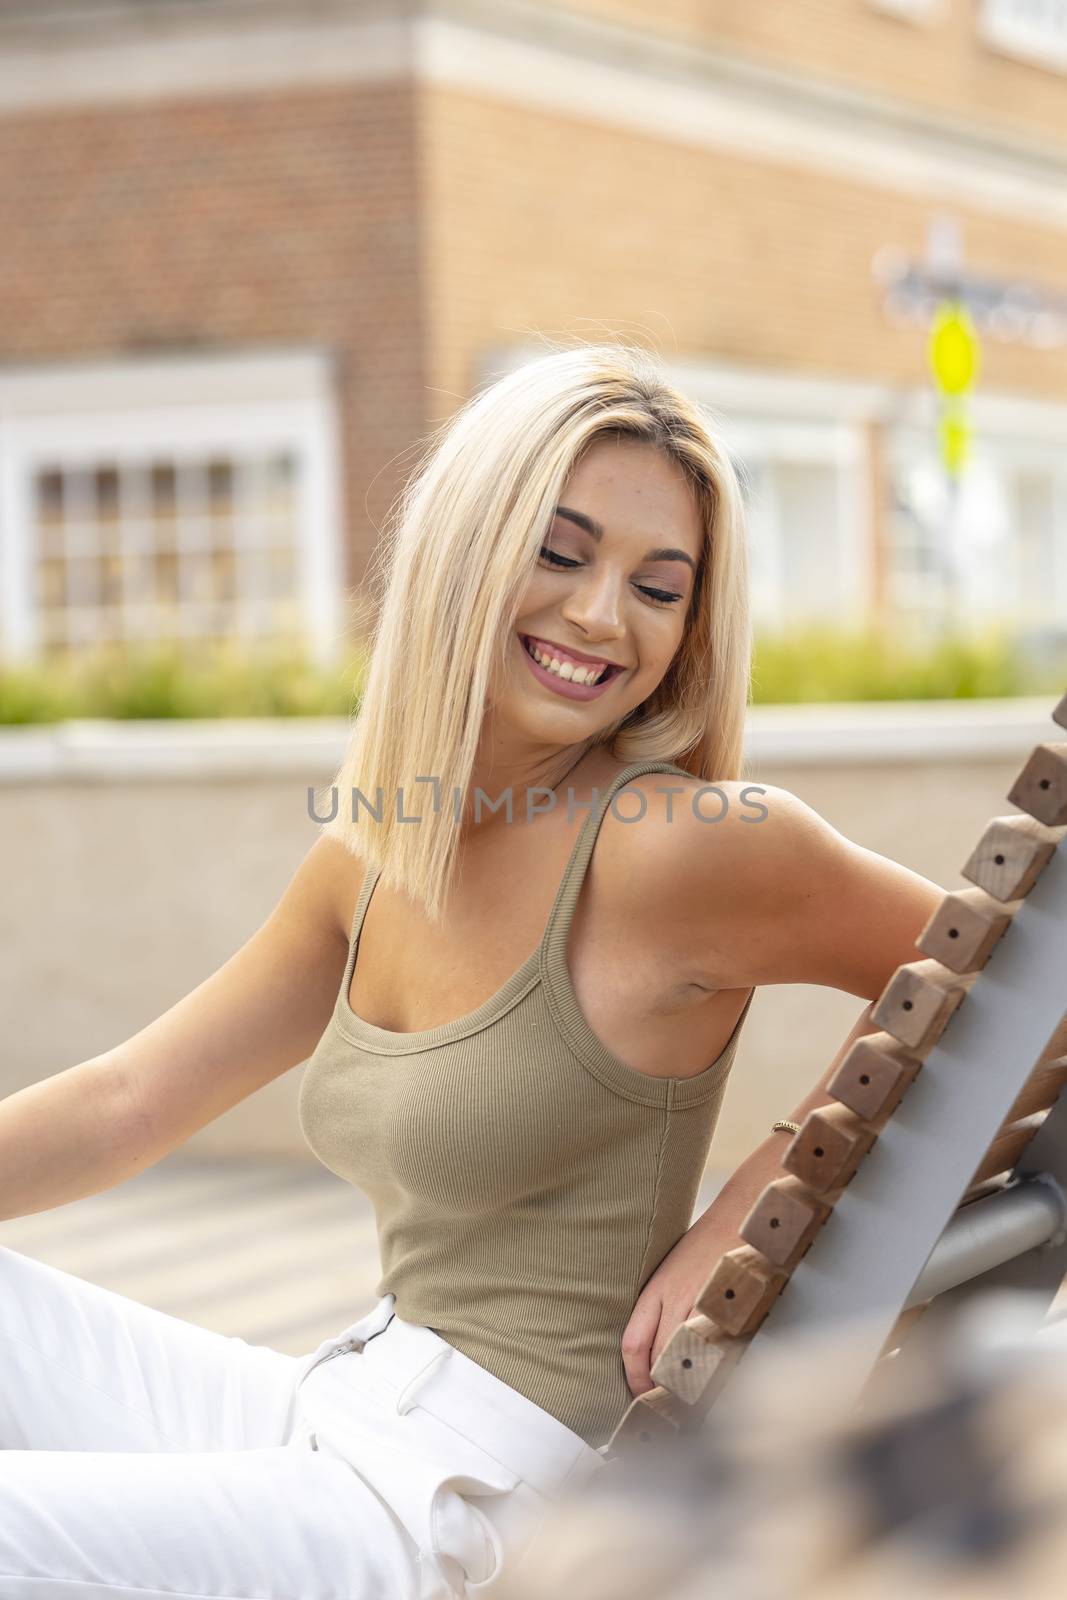 A gorgeous young blonde model poses outdoors while enjoying a summers day